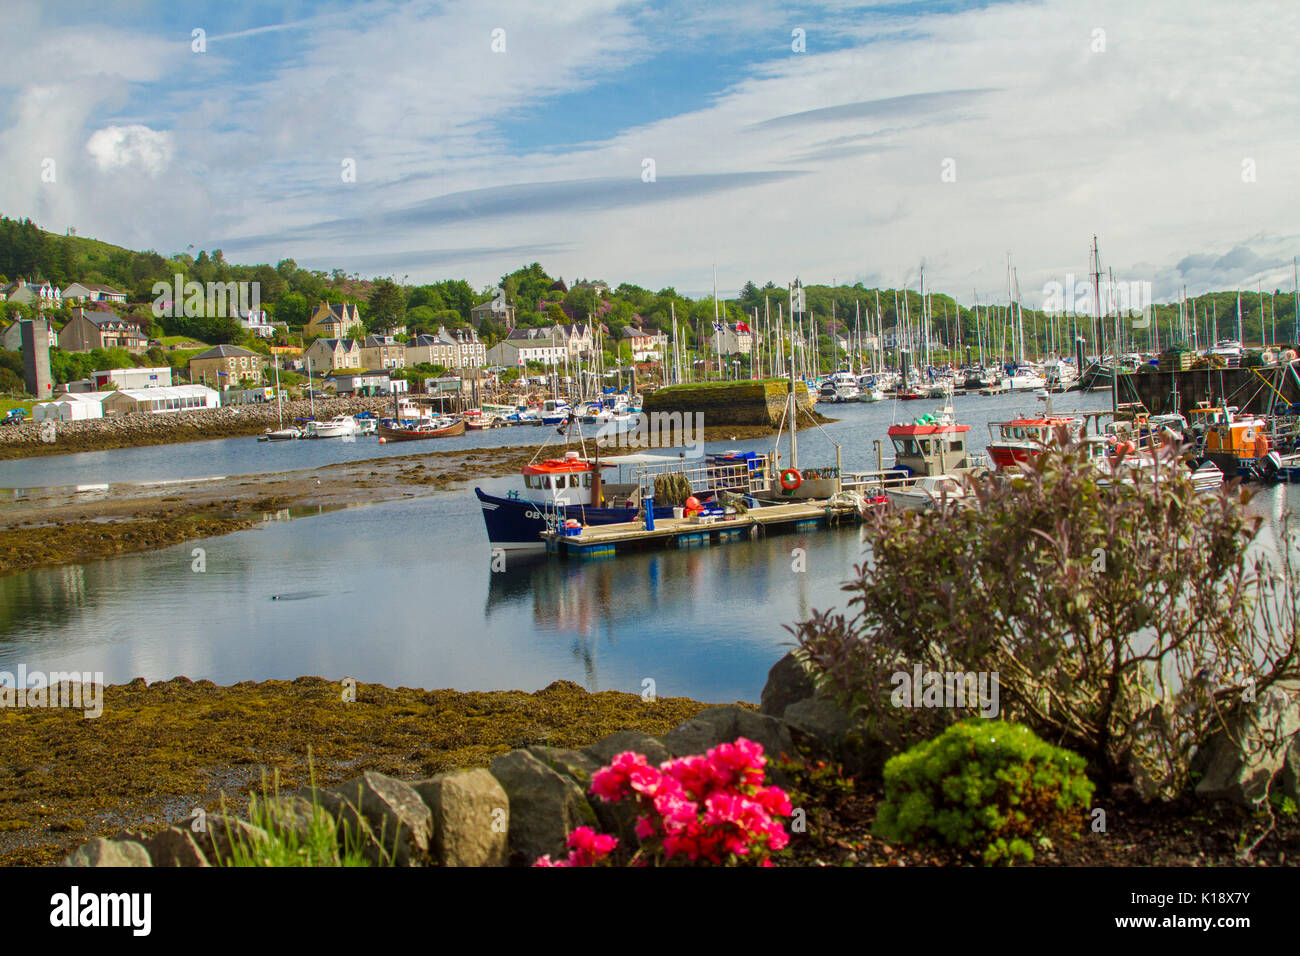 Scottish village of Tarbert with colourful buildings at foot of wooded hills and boats in harbour on Loch Tarbert under blue sky, Scotland Stock Photo